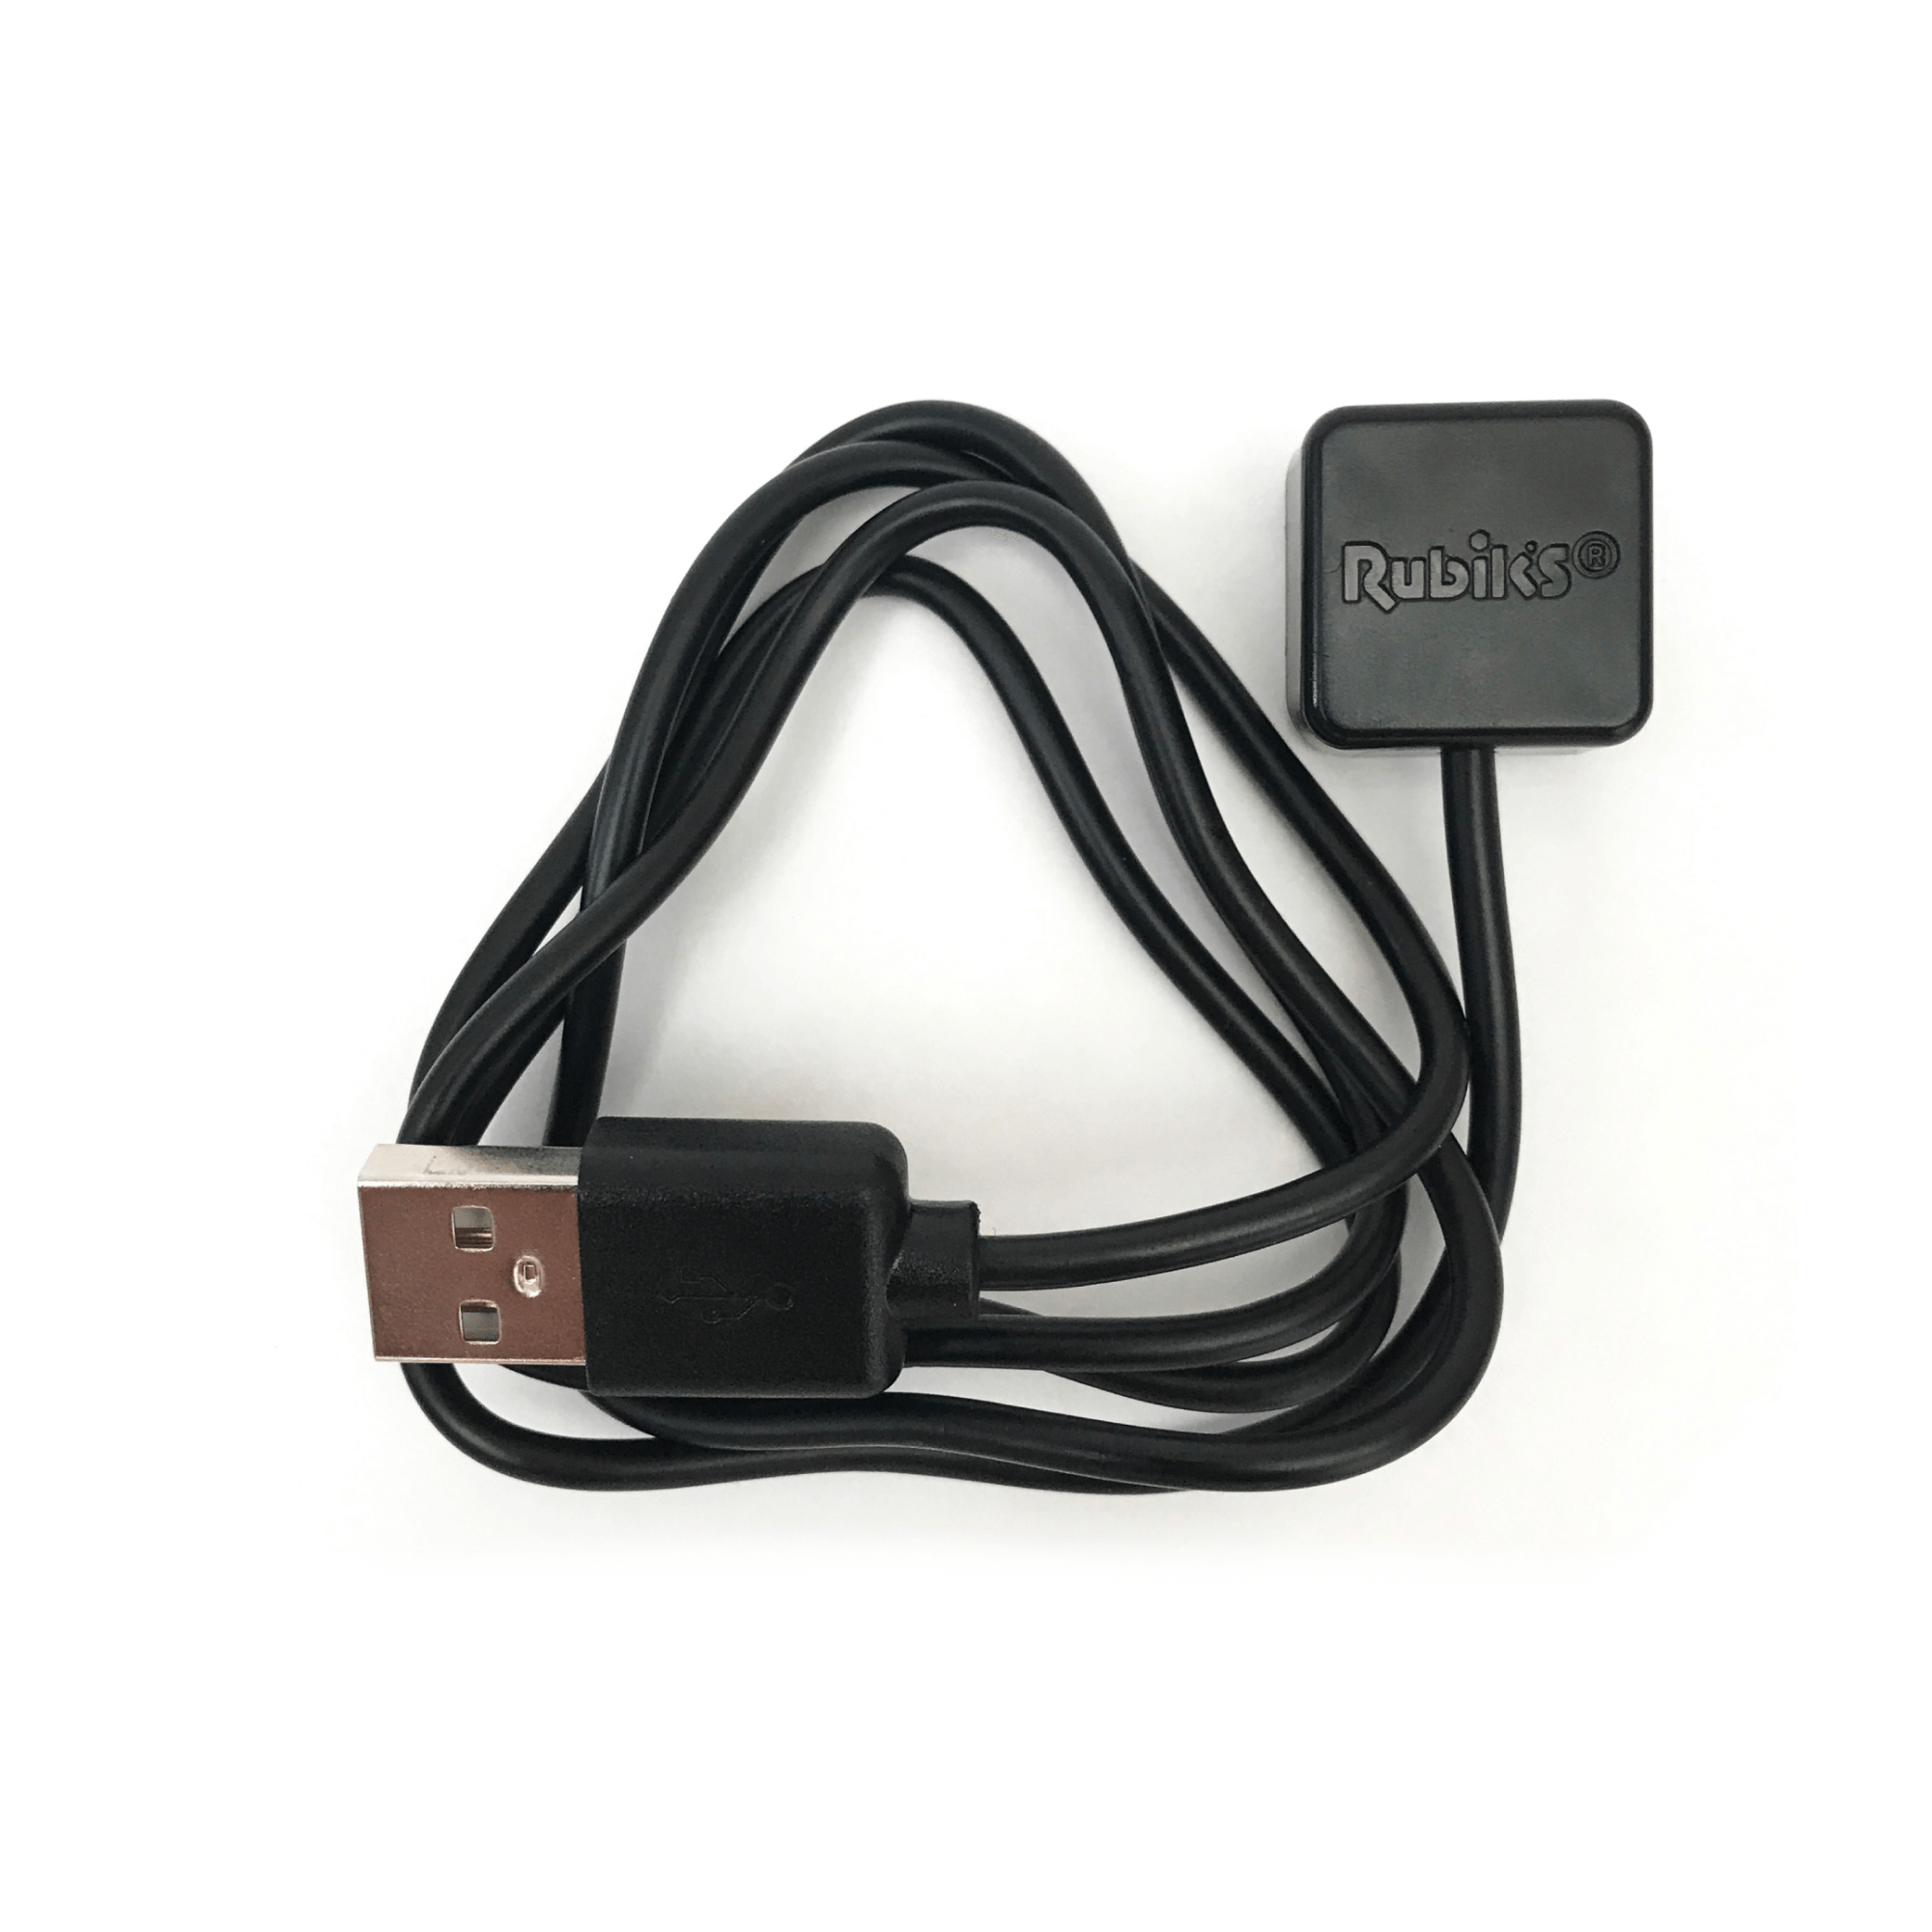 Rubik's Connected charging cable